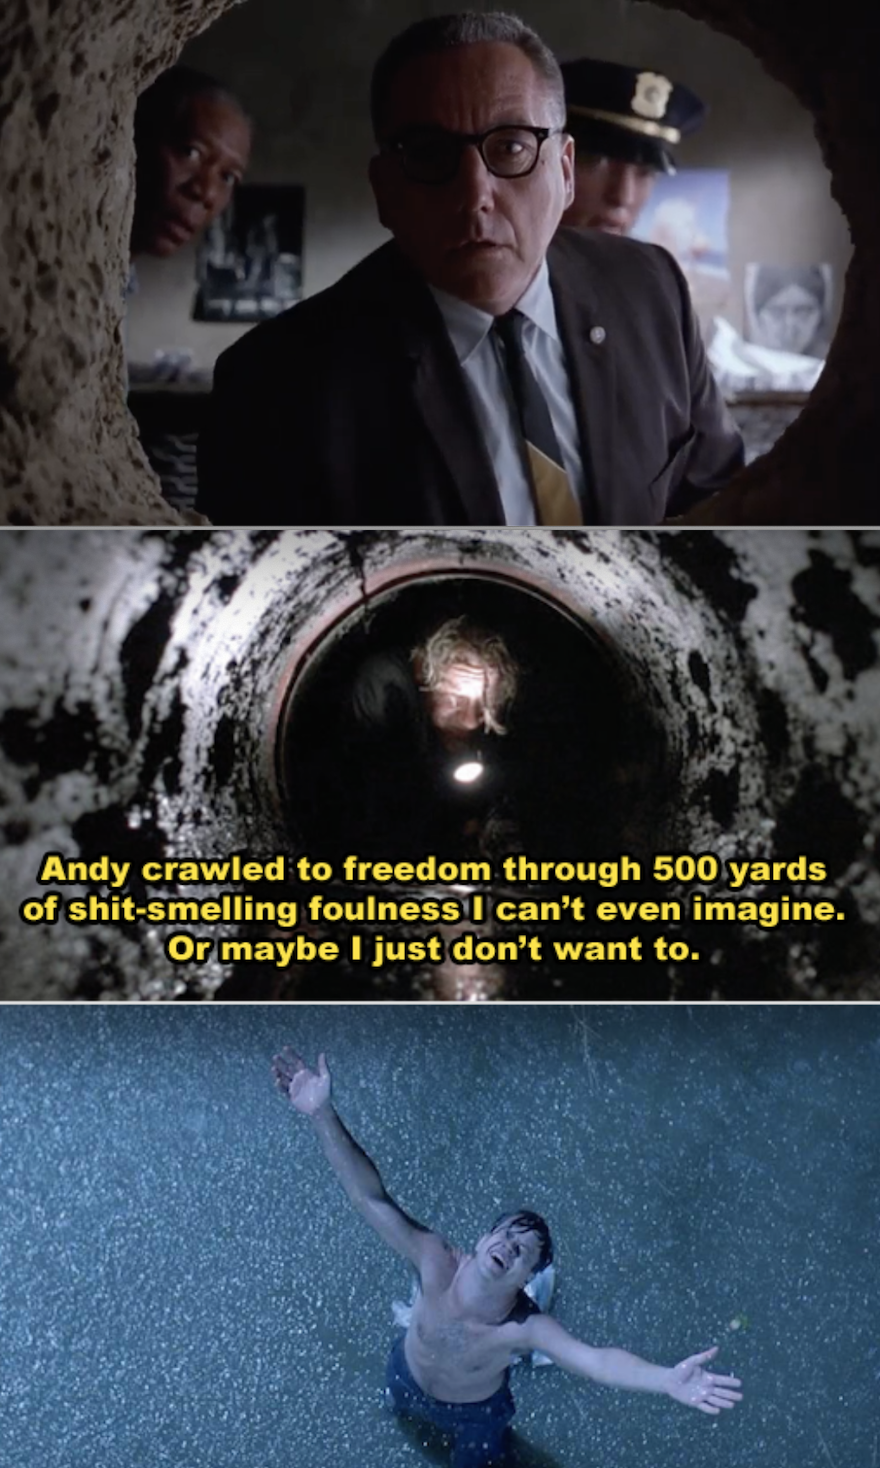 Andy escaping from prison